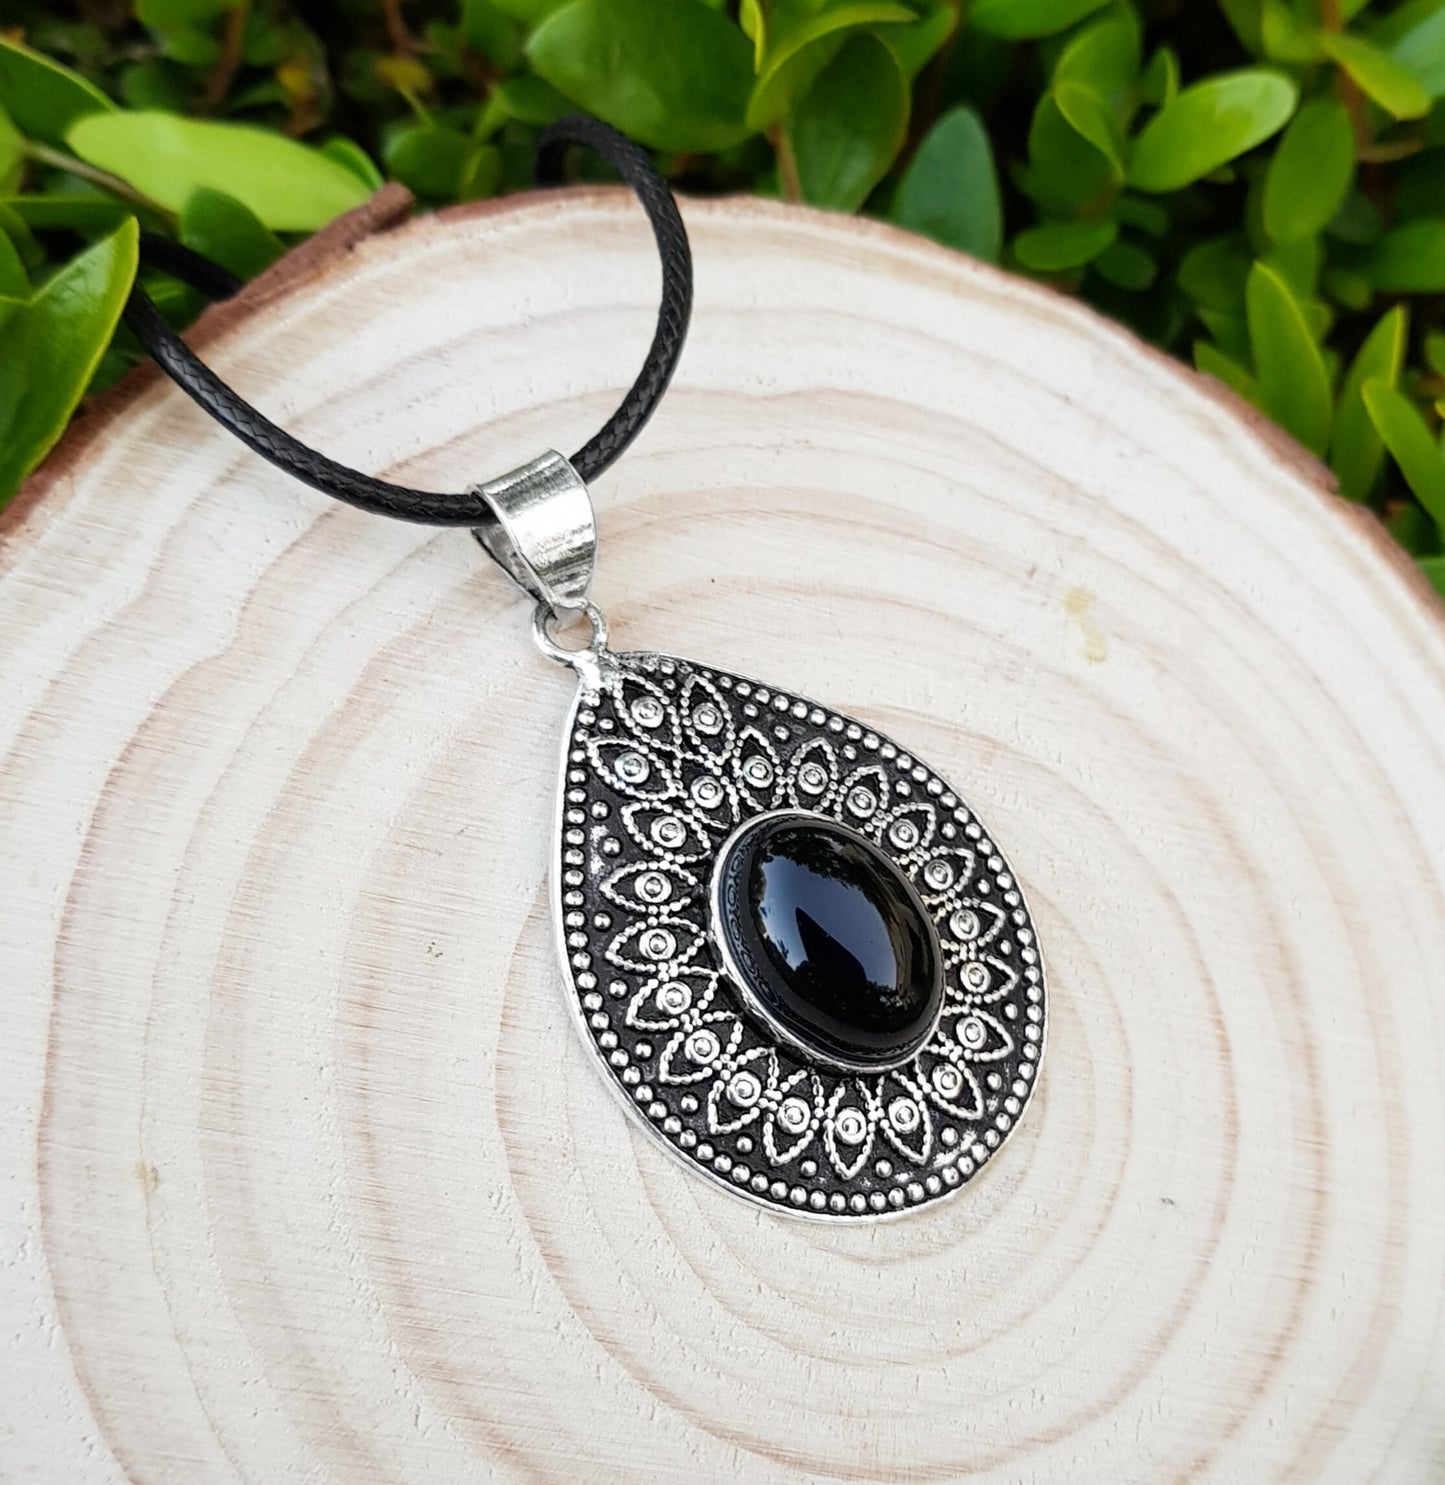 Black Onyx Ethnic Pendant In Sterling Silver Big Teardrop Pendant Boho Crystal Necklace Unique Gift For Women